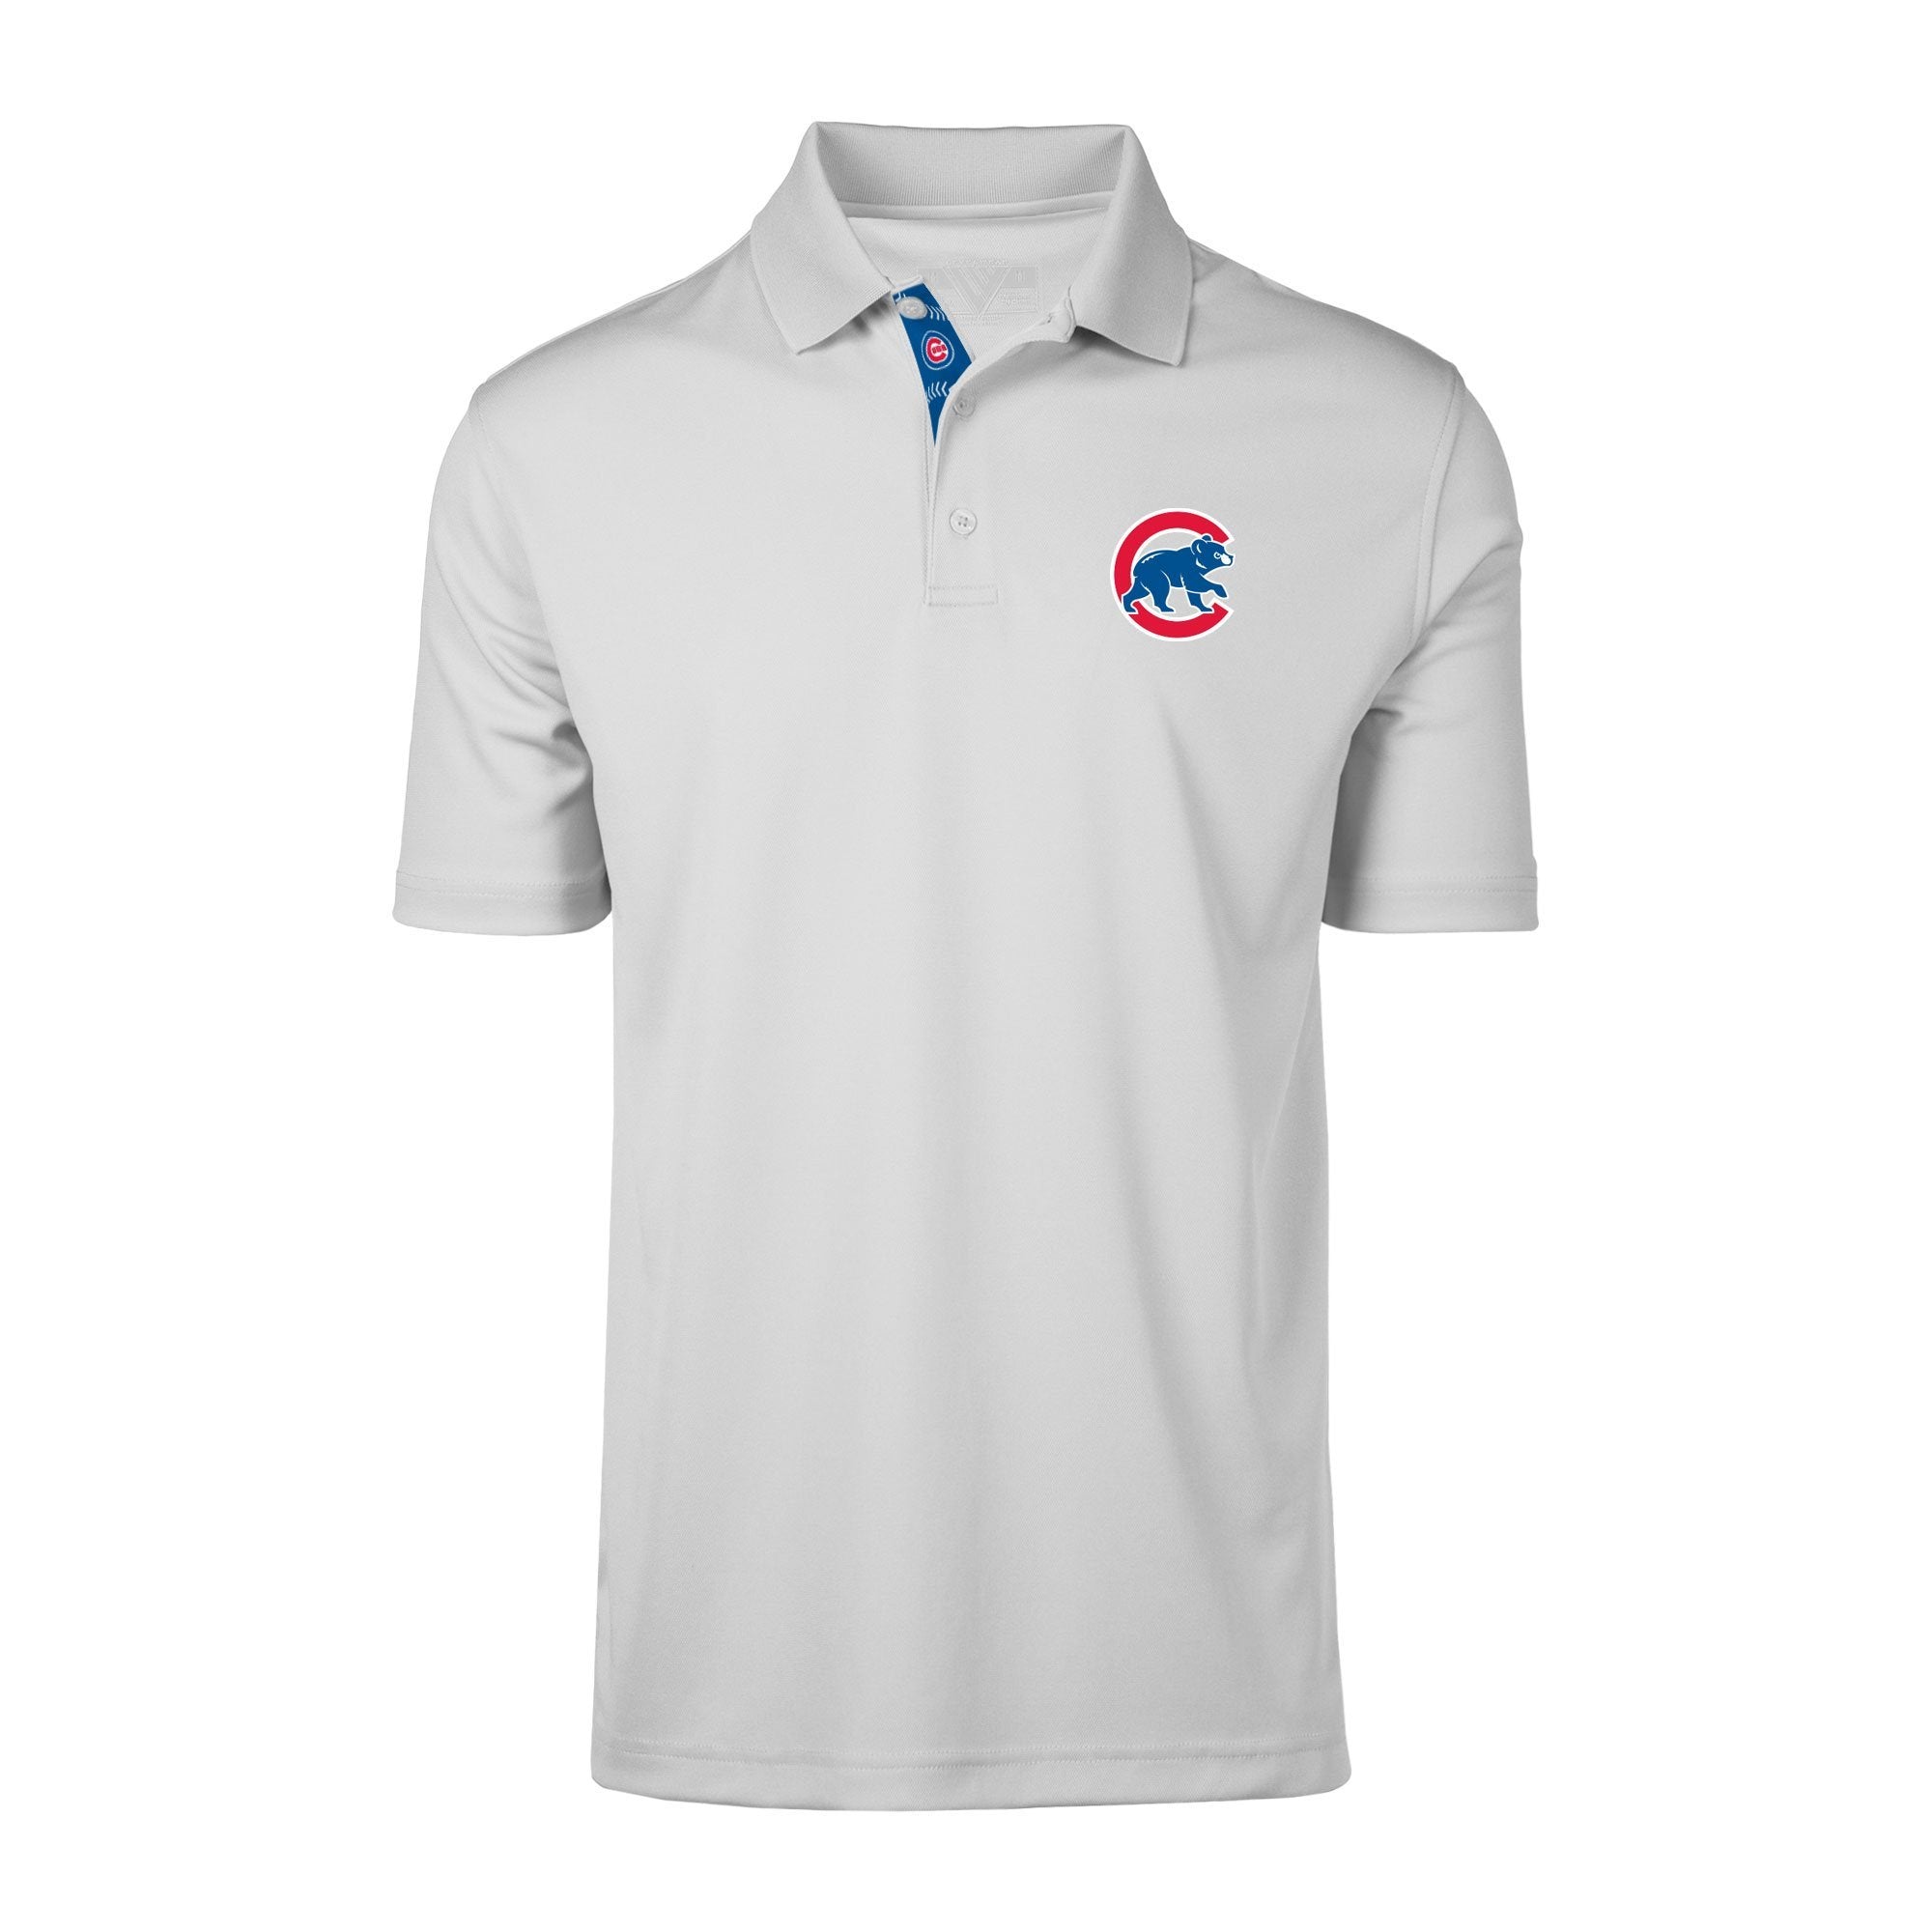 old navy chicago cubs shirt